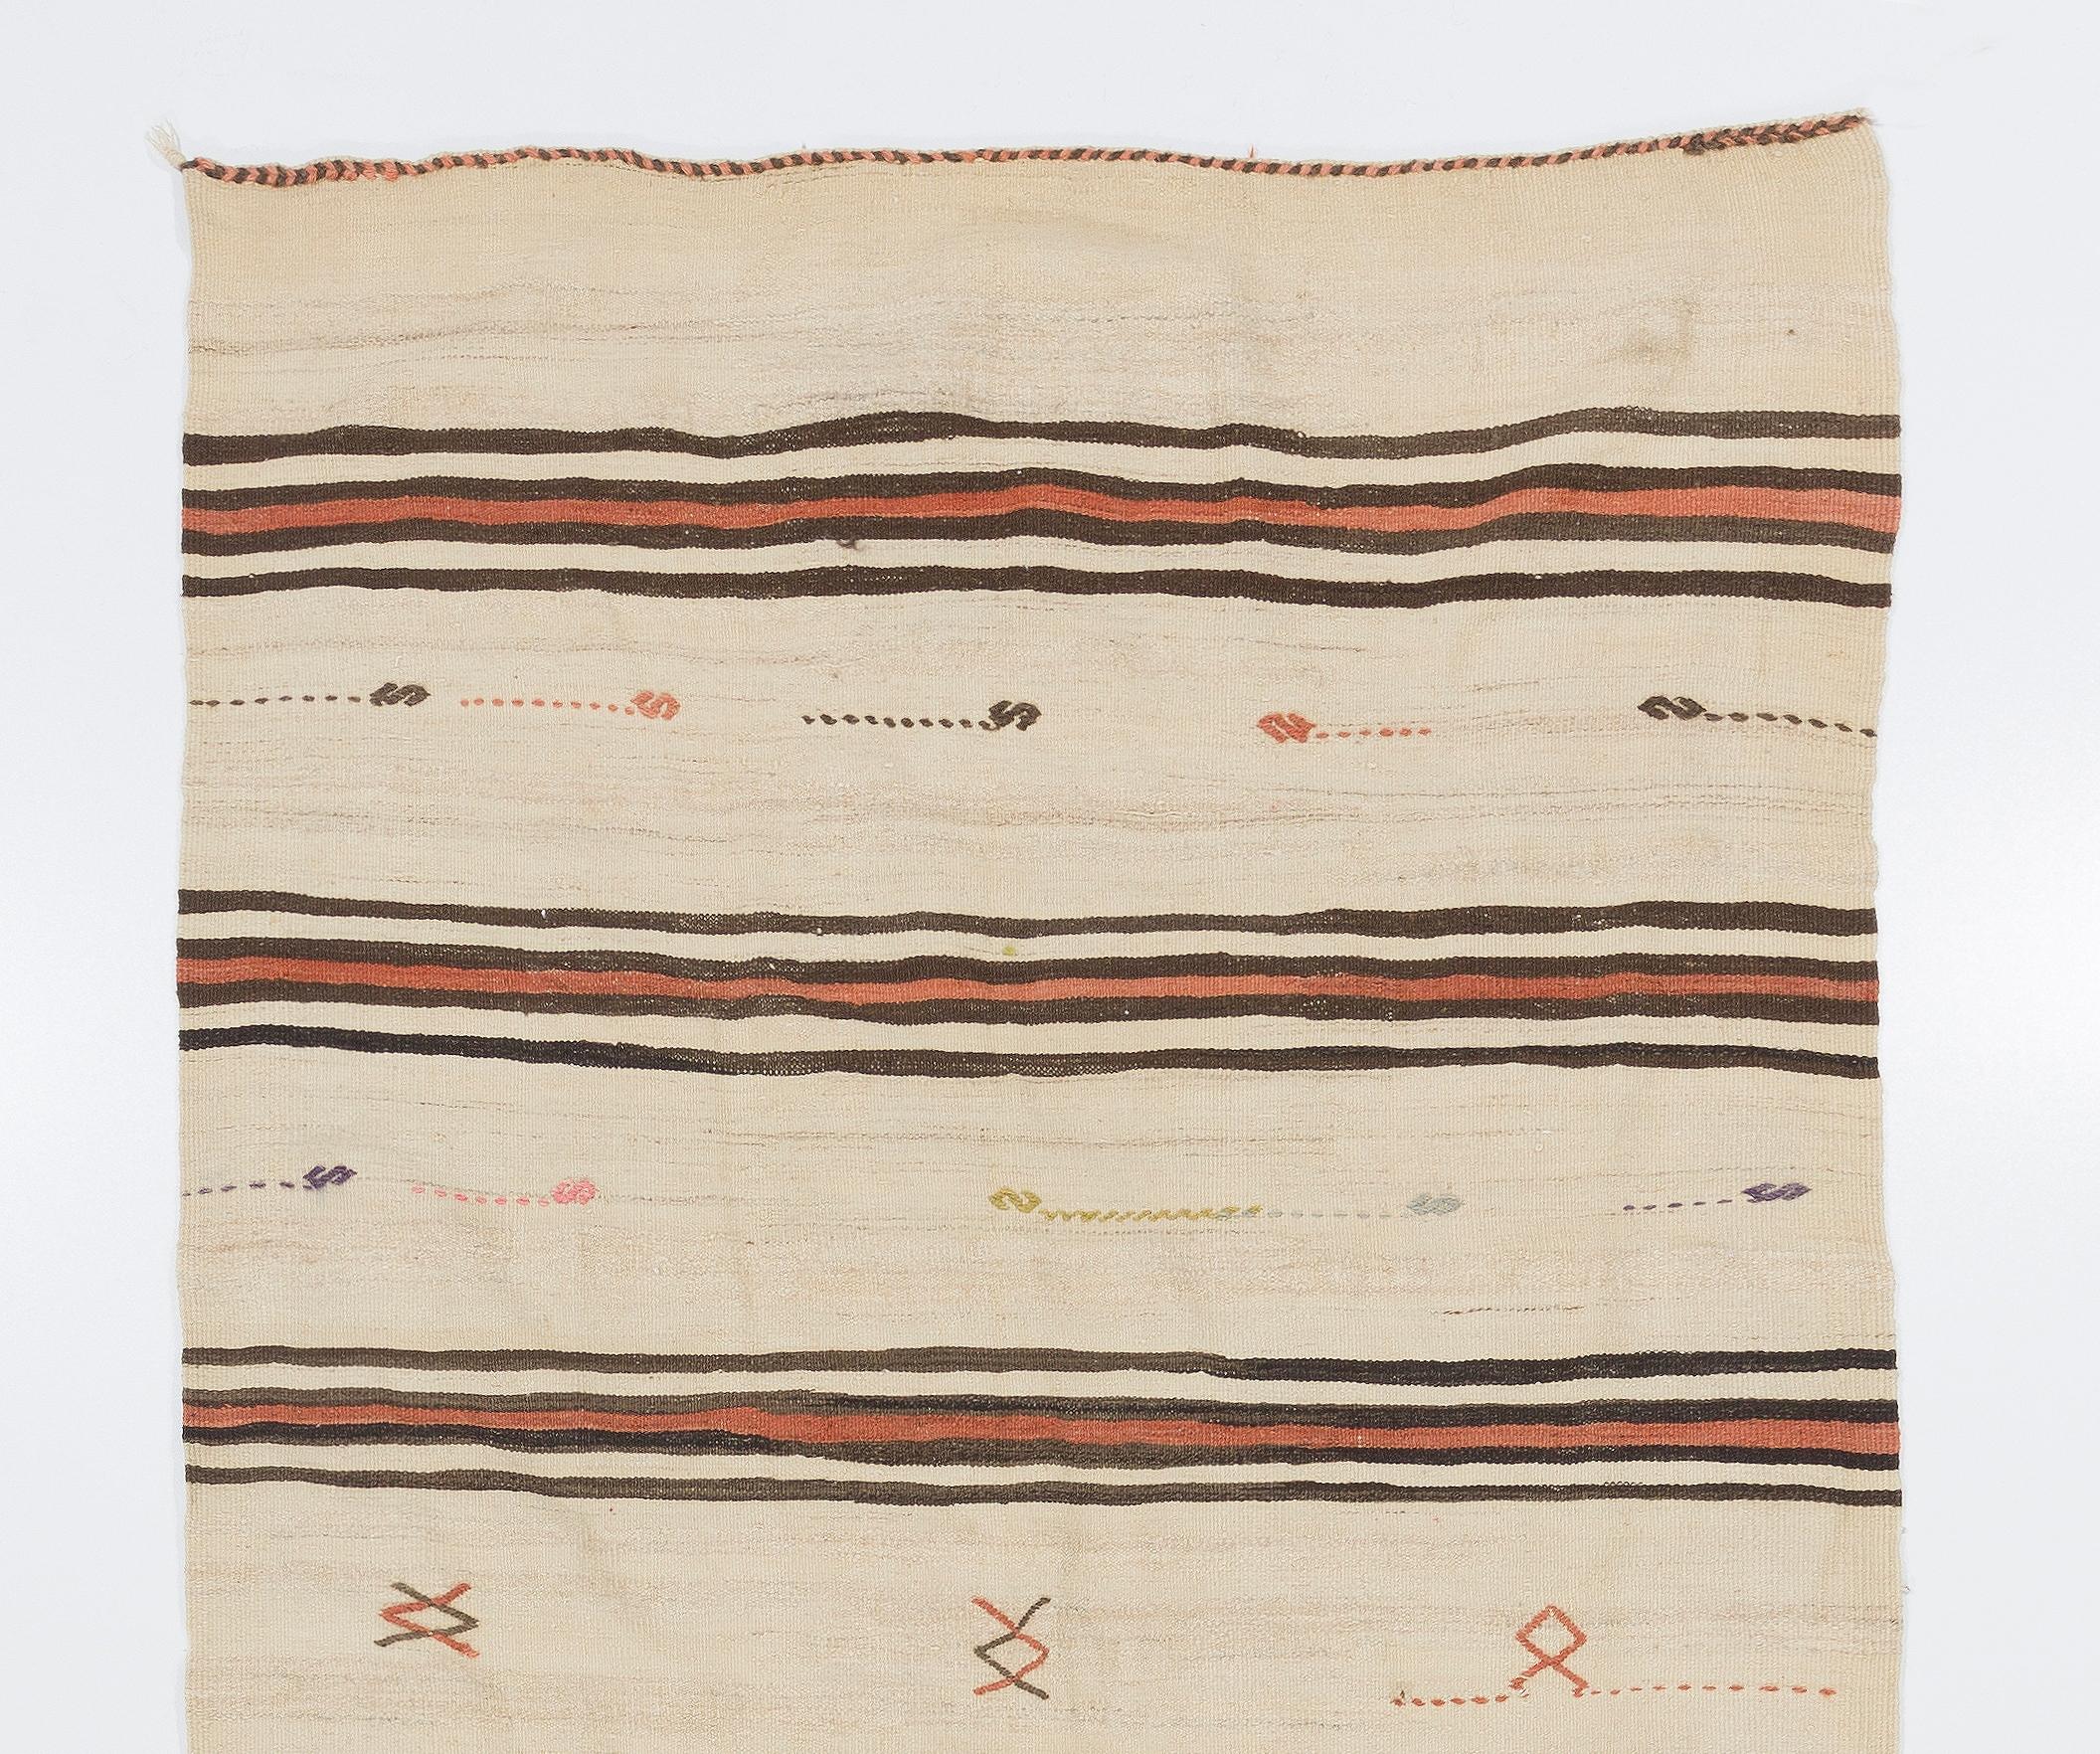 A simple yet beautiful wool flat-weave rug handwoven by the nomadic tribes in South Central Turkey that has a design of stripes in beige, brown and madder red and minuscule simple geometric motifs such as hooks and diamonds in various other colors